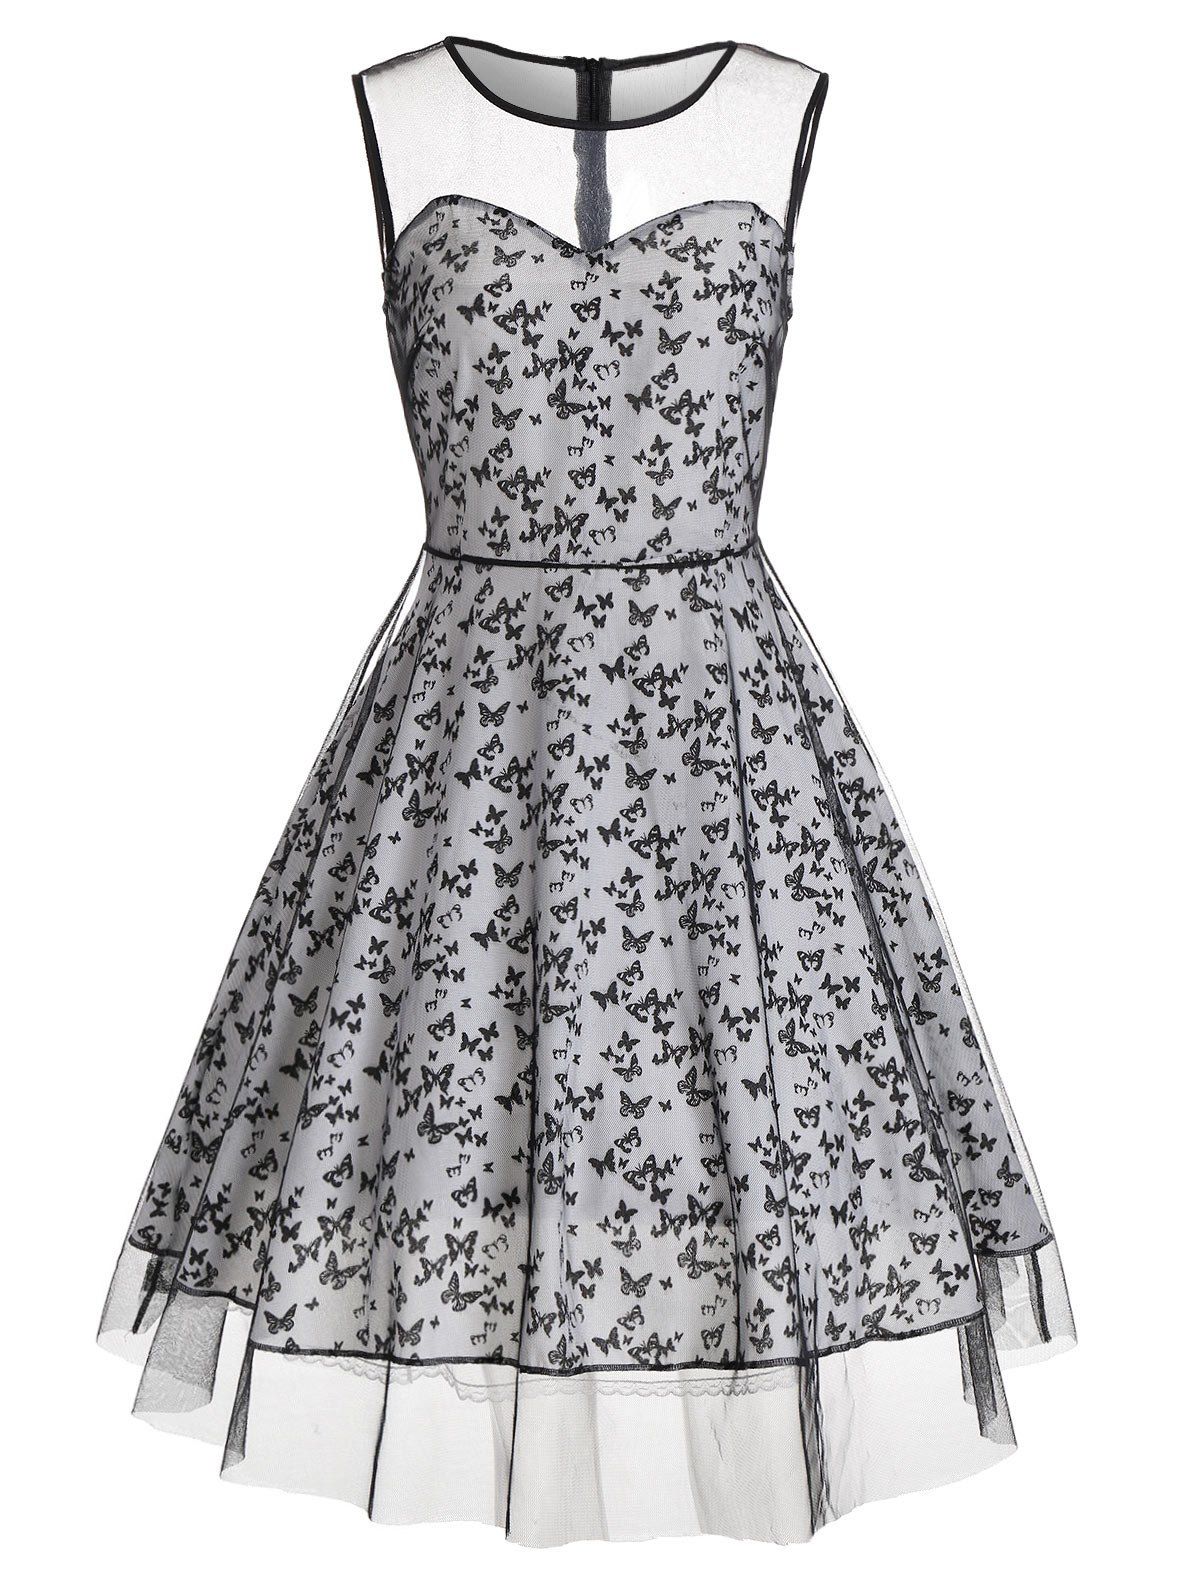 [37% OFF] Vintage Butterfly Dress With Mesh Panel | Rosegal